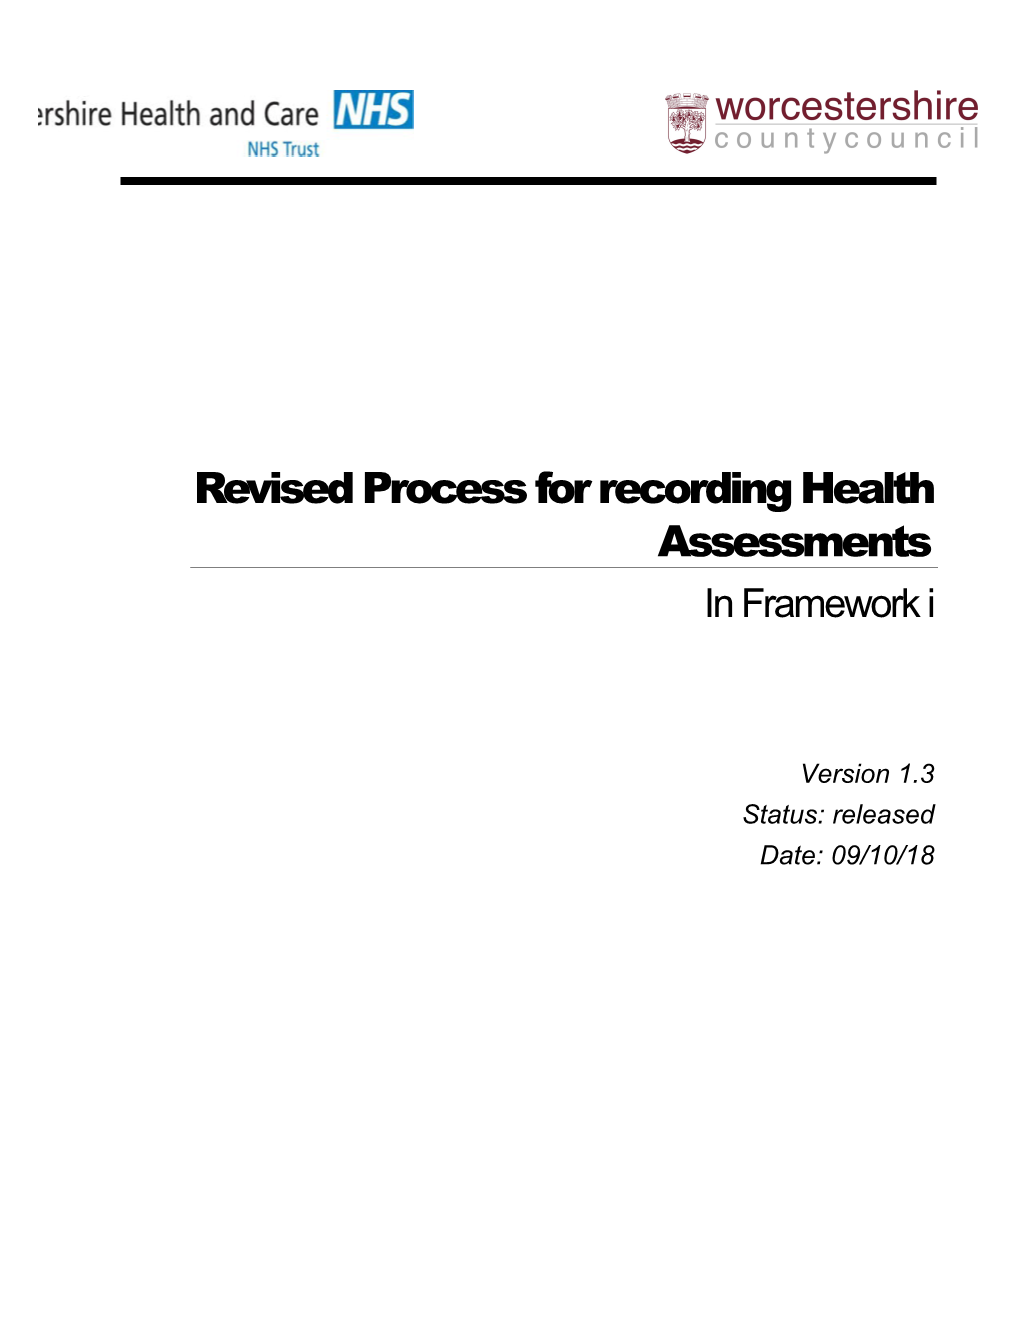 Revised Process for Recording Health Assessments